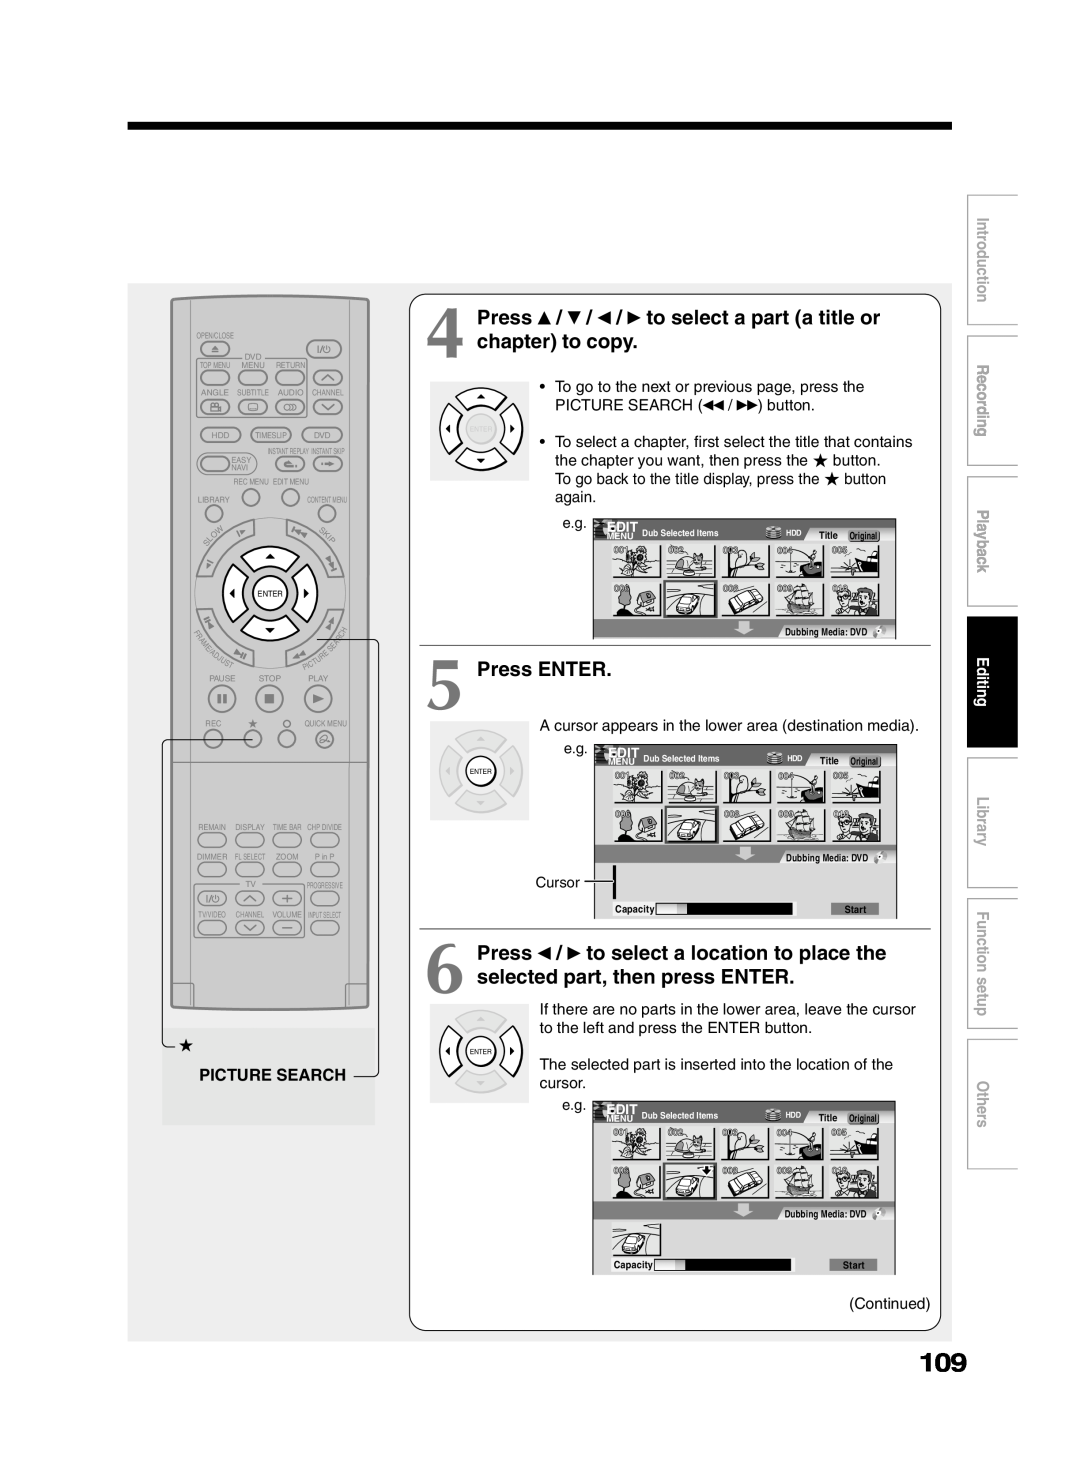 Toshiba RD-XS32SU to select a part a title or, chapter to copy, Press ENTER, to select a location to place the, setup 